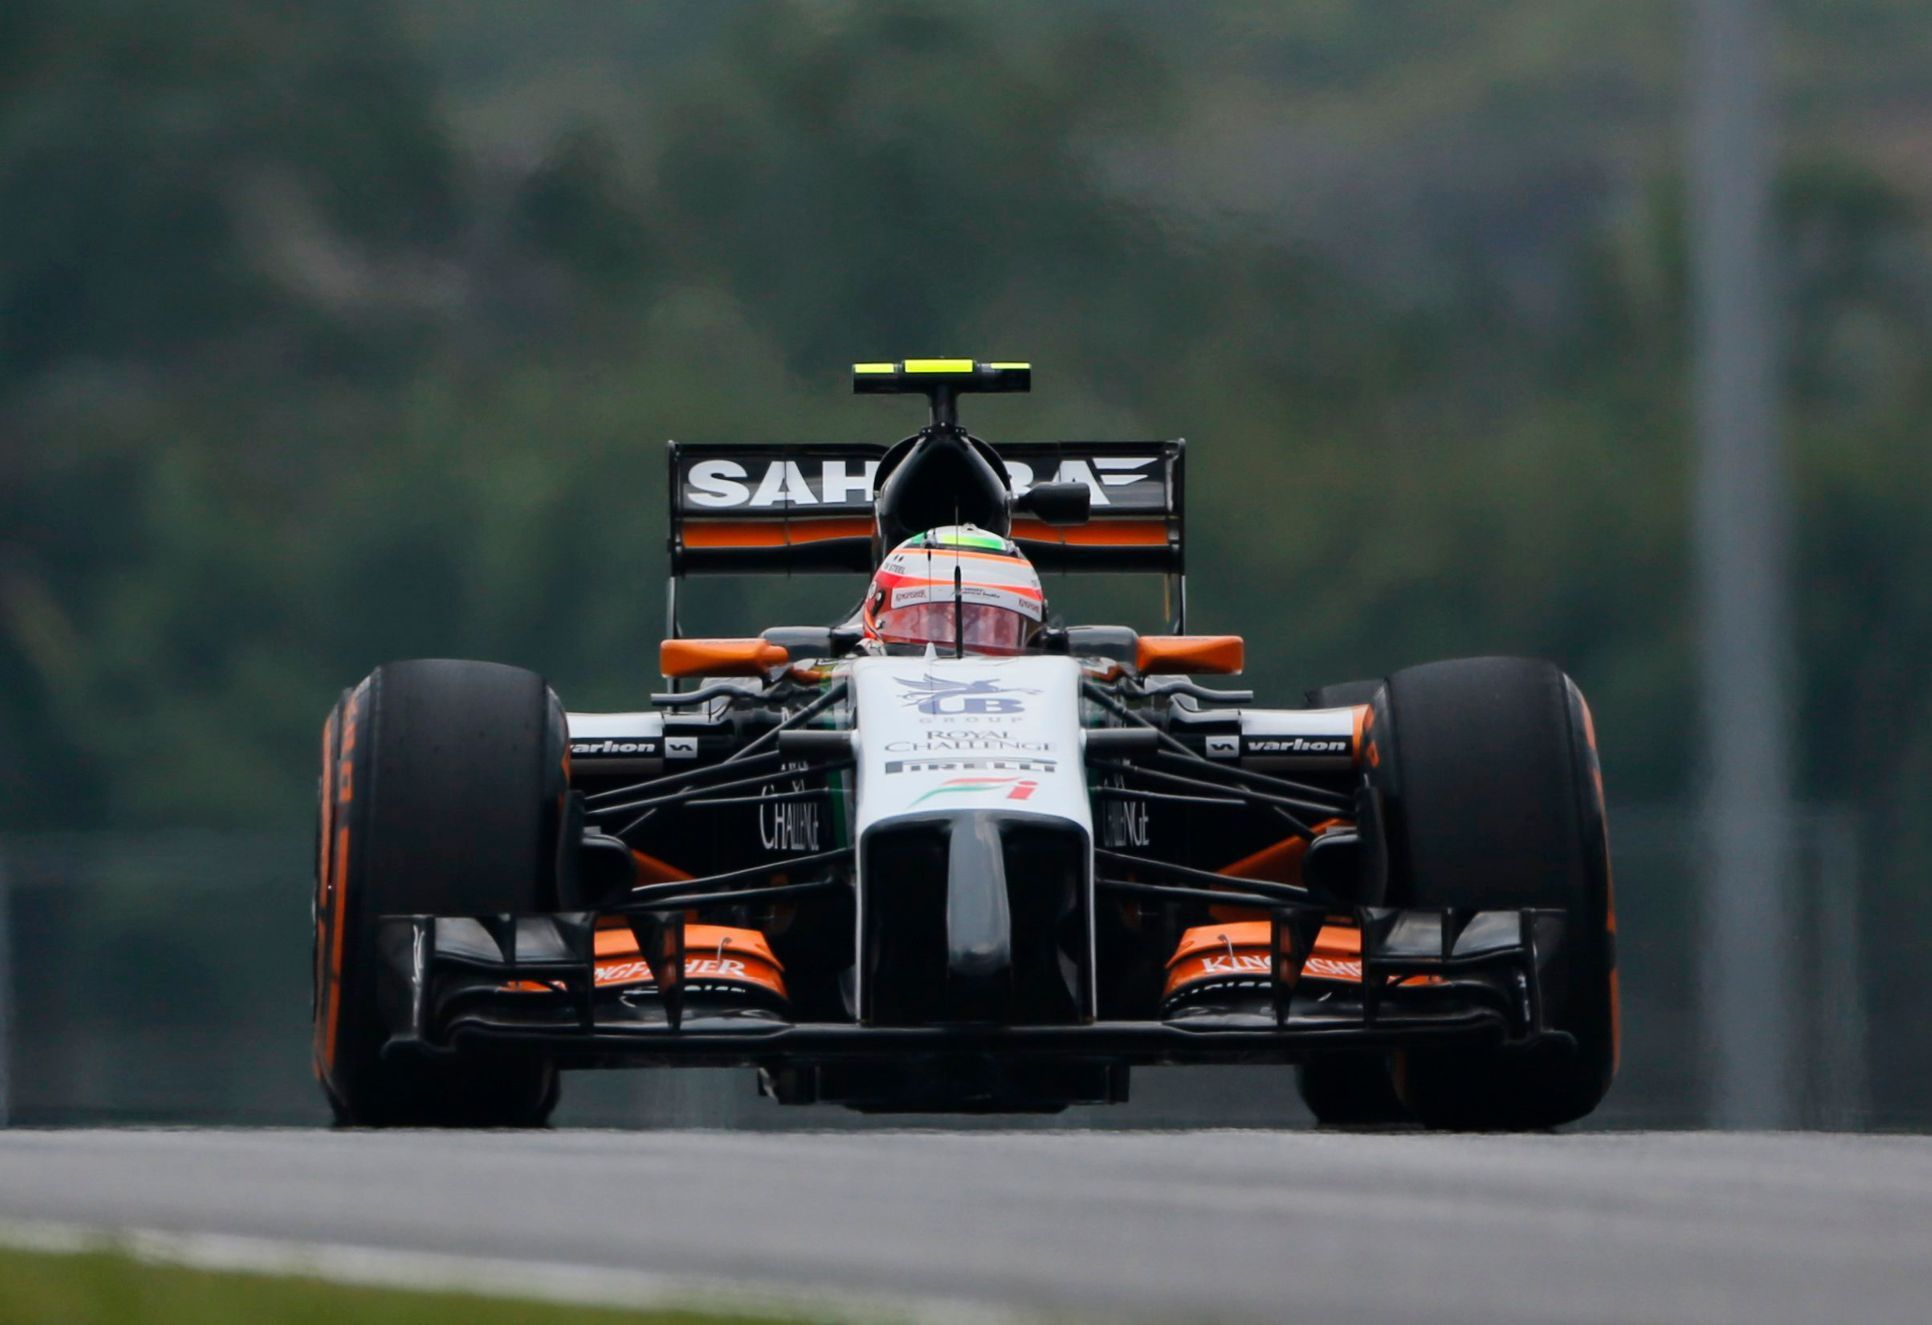 Force India Formula One driver Perez of Mexico drives during the second practice session of the Malaysian F1 Grand Prix at Sepang International Circuit outside Kuala Lumpur